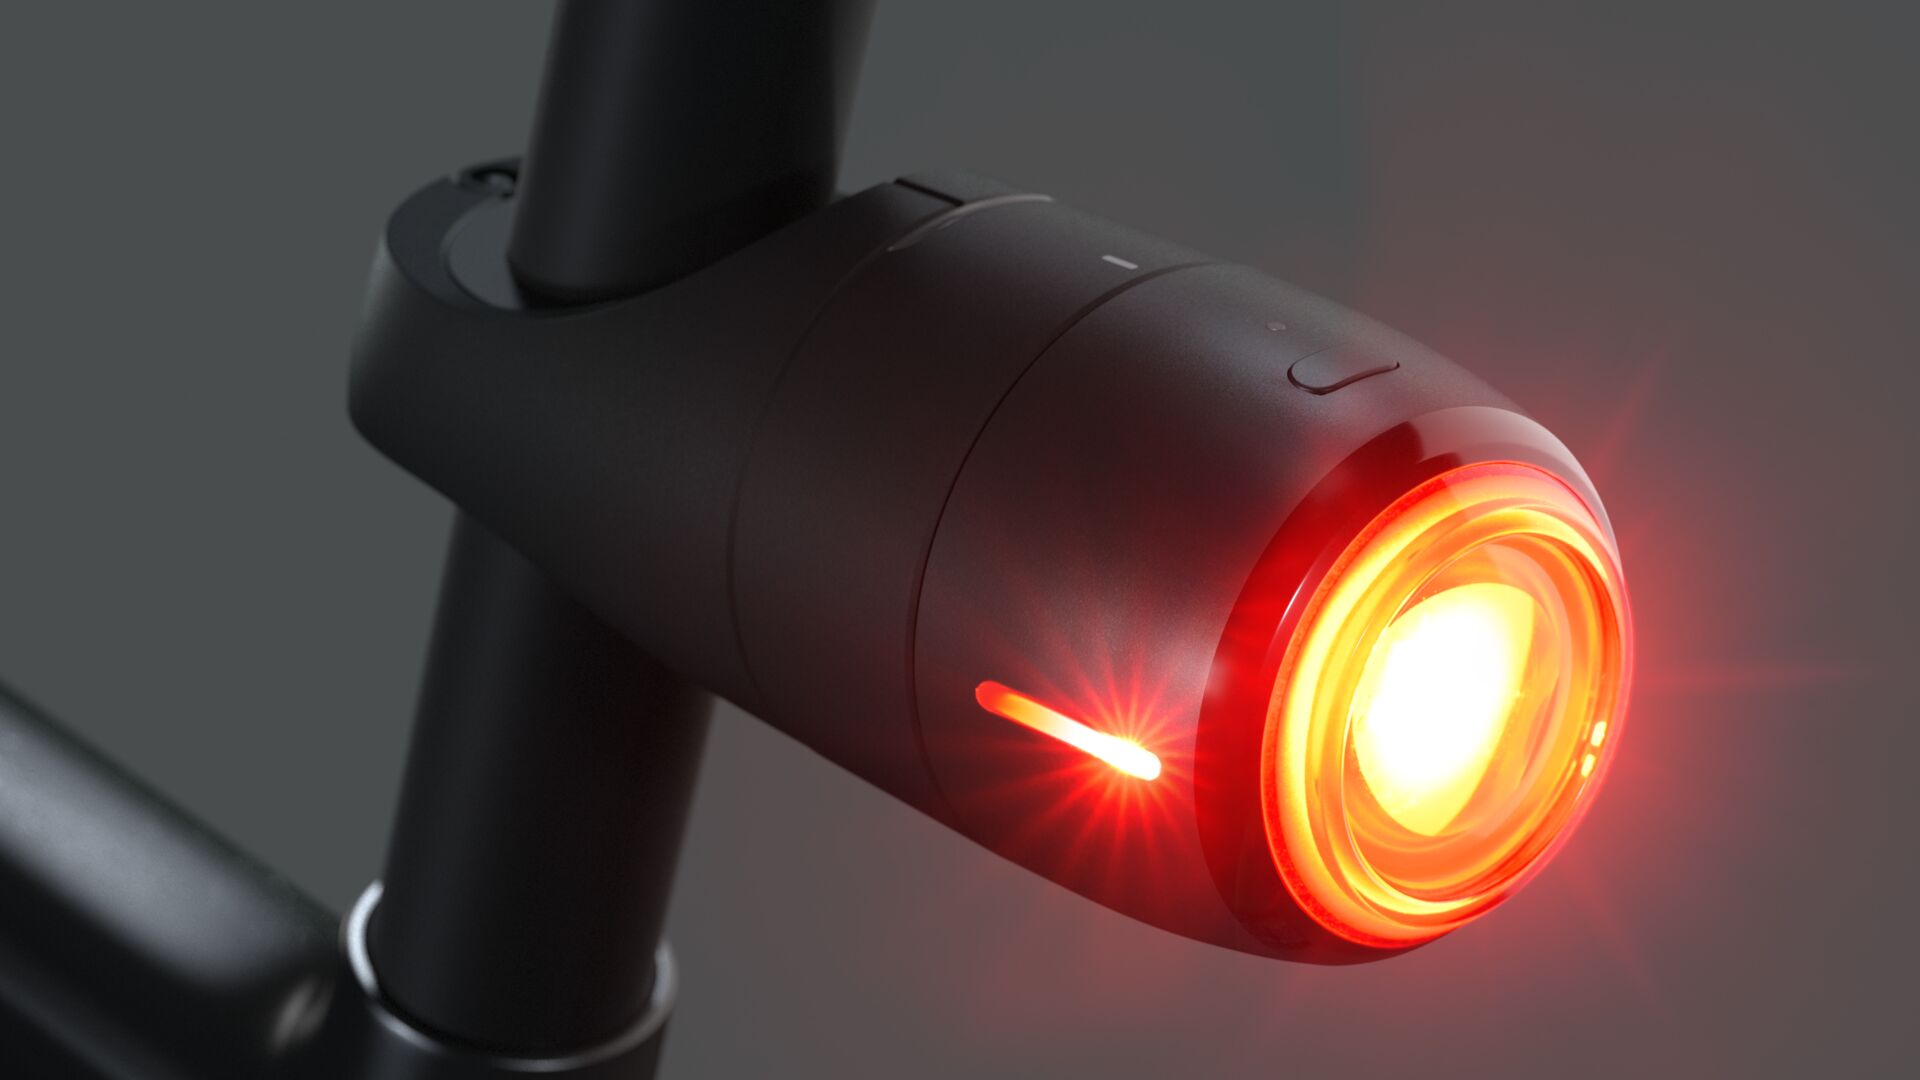 an image of the Vodafone Curve Bike light and GPS tracker